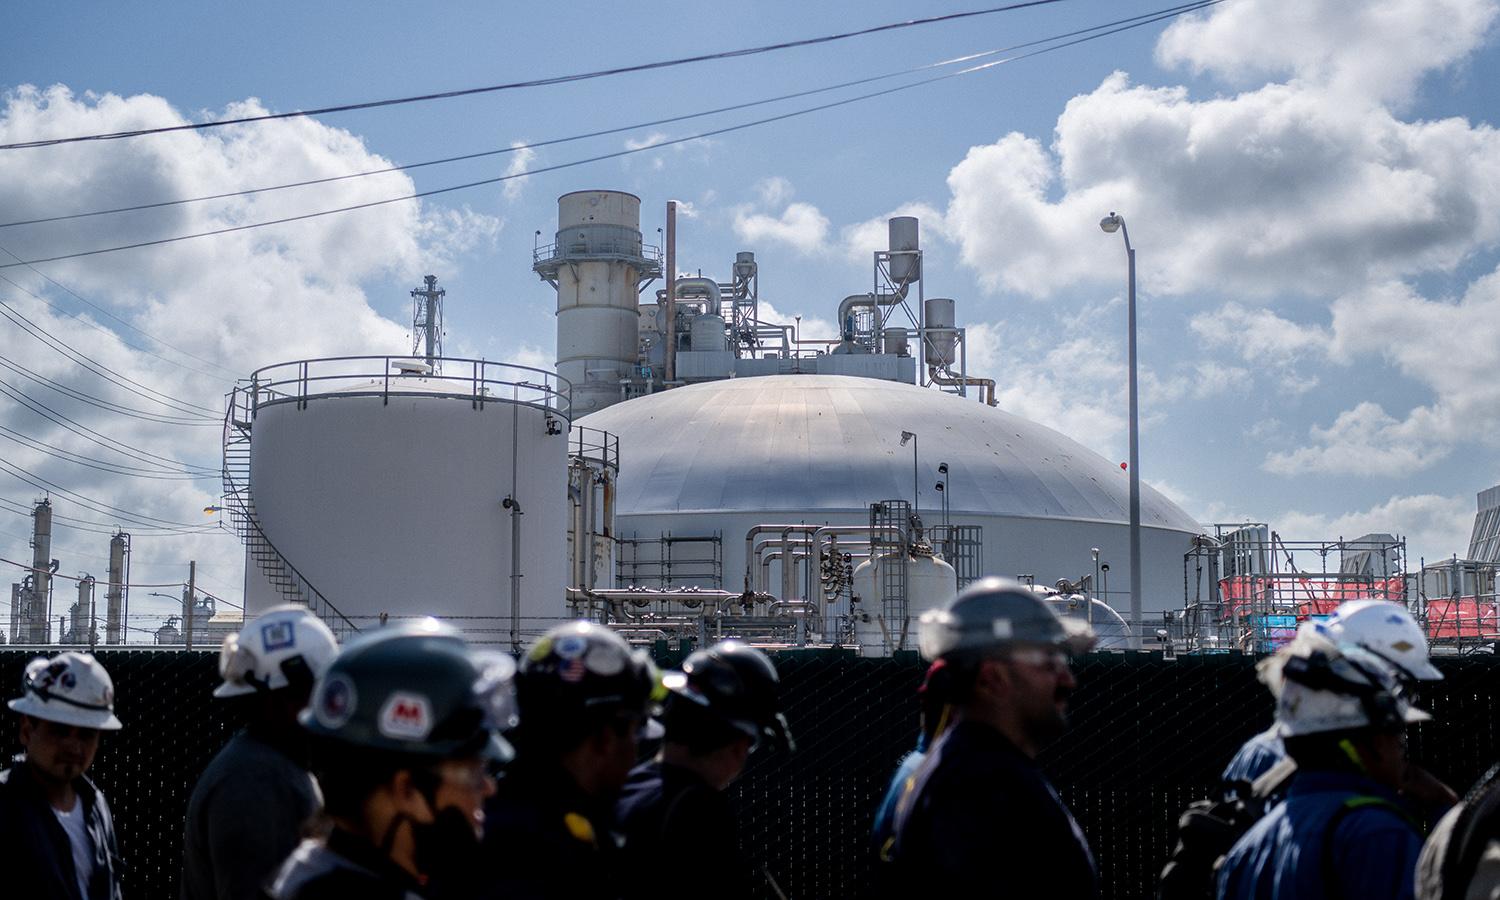 Dragos is offering small- and medium-sized industrial asset owners and operators free tools to help manage their security. Pictured: Workers exit the Marathon Galveston Bay Refinery on May 10, 2022, in Texas City, Texas. (Photo by Brandon Bell/Getty Images)